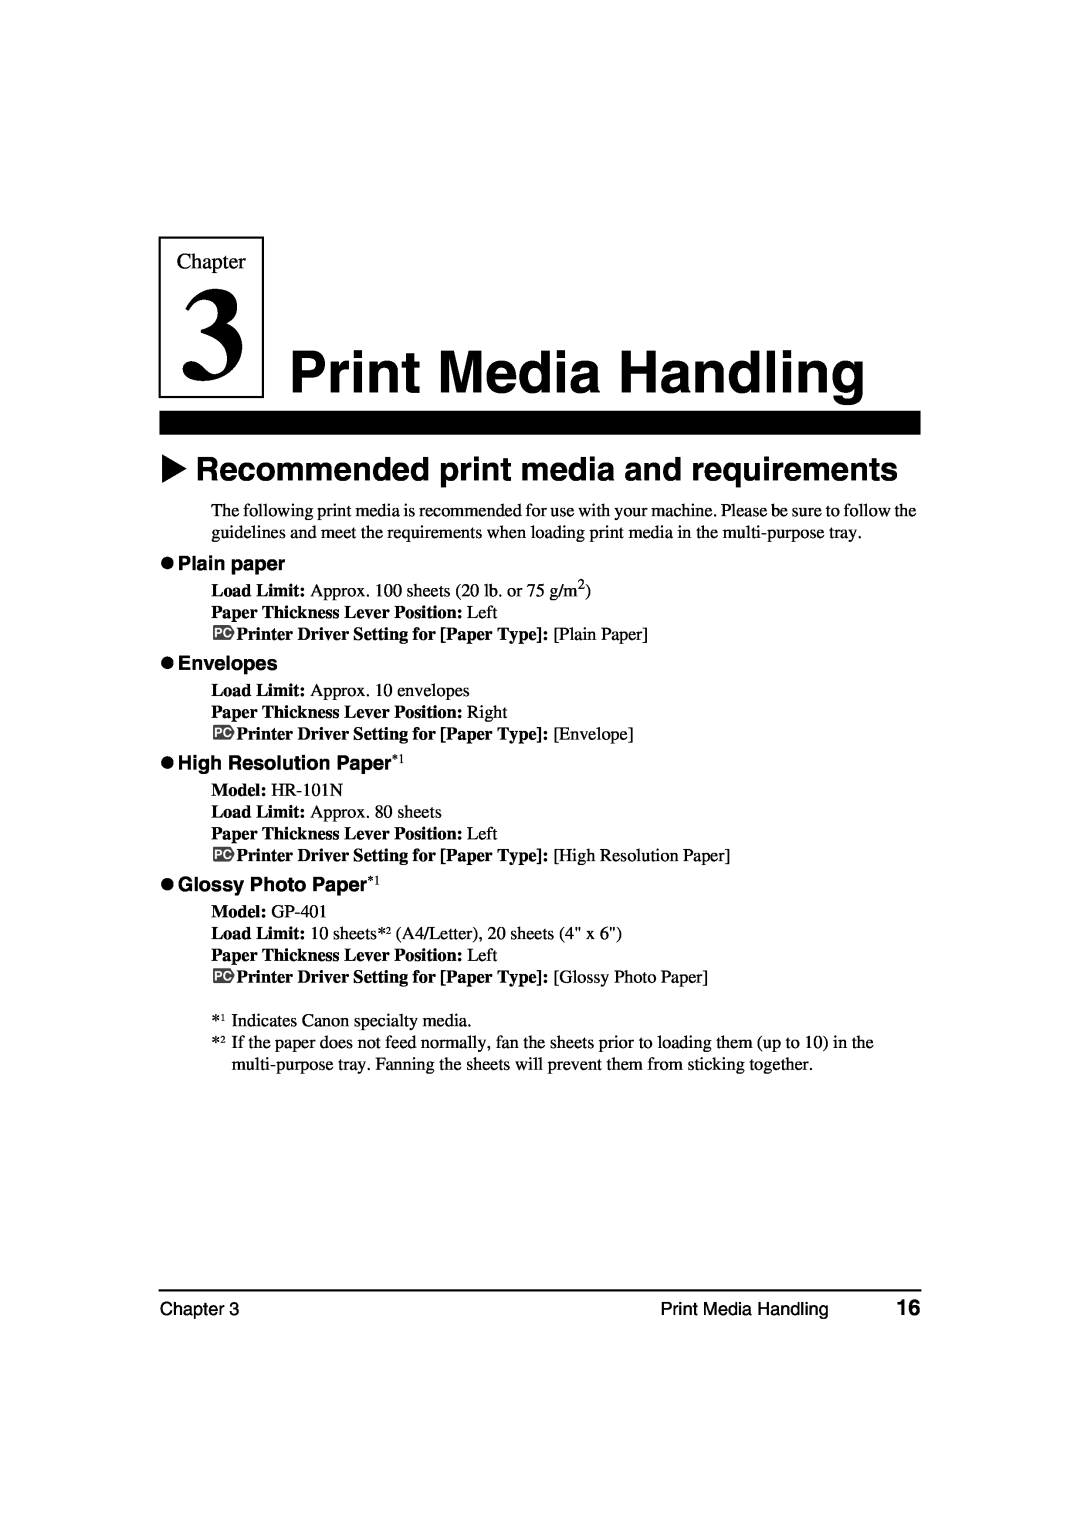 Canon MP360, MP370 Print Media Handling, Recommended print media and requirements, z Plain paper, z Envelopes, Chapter 